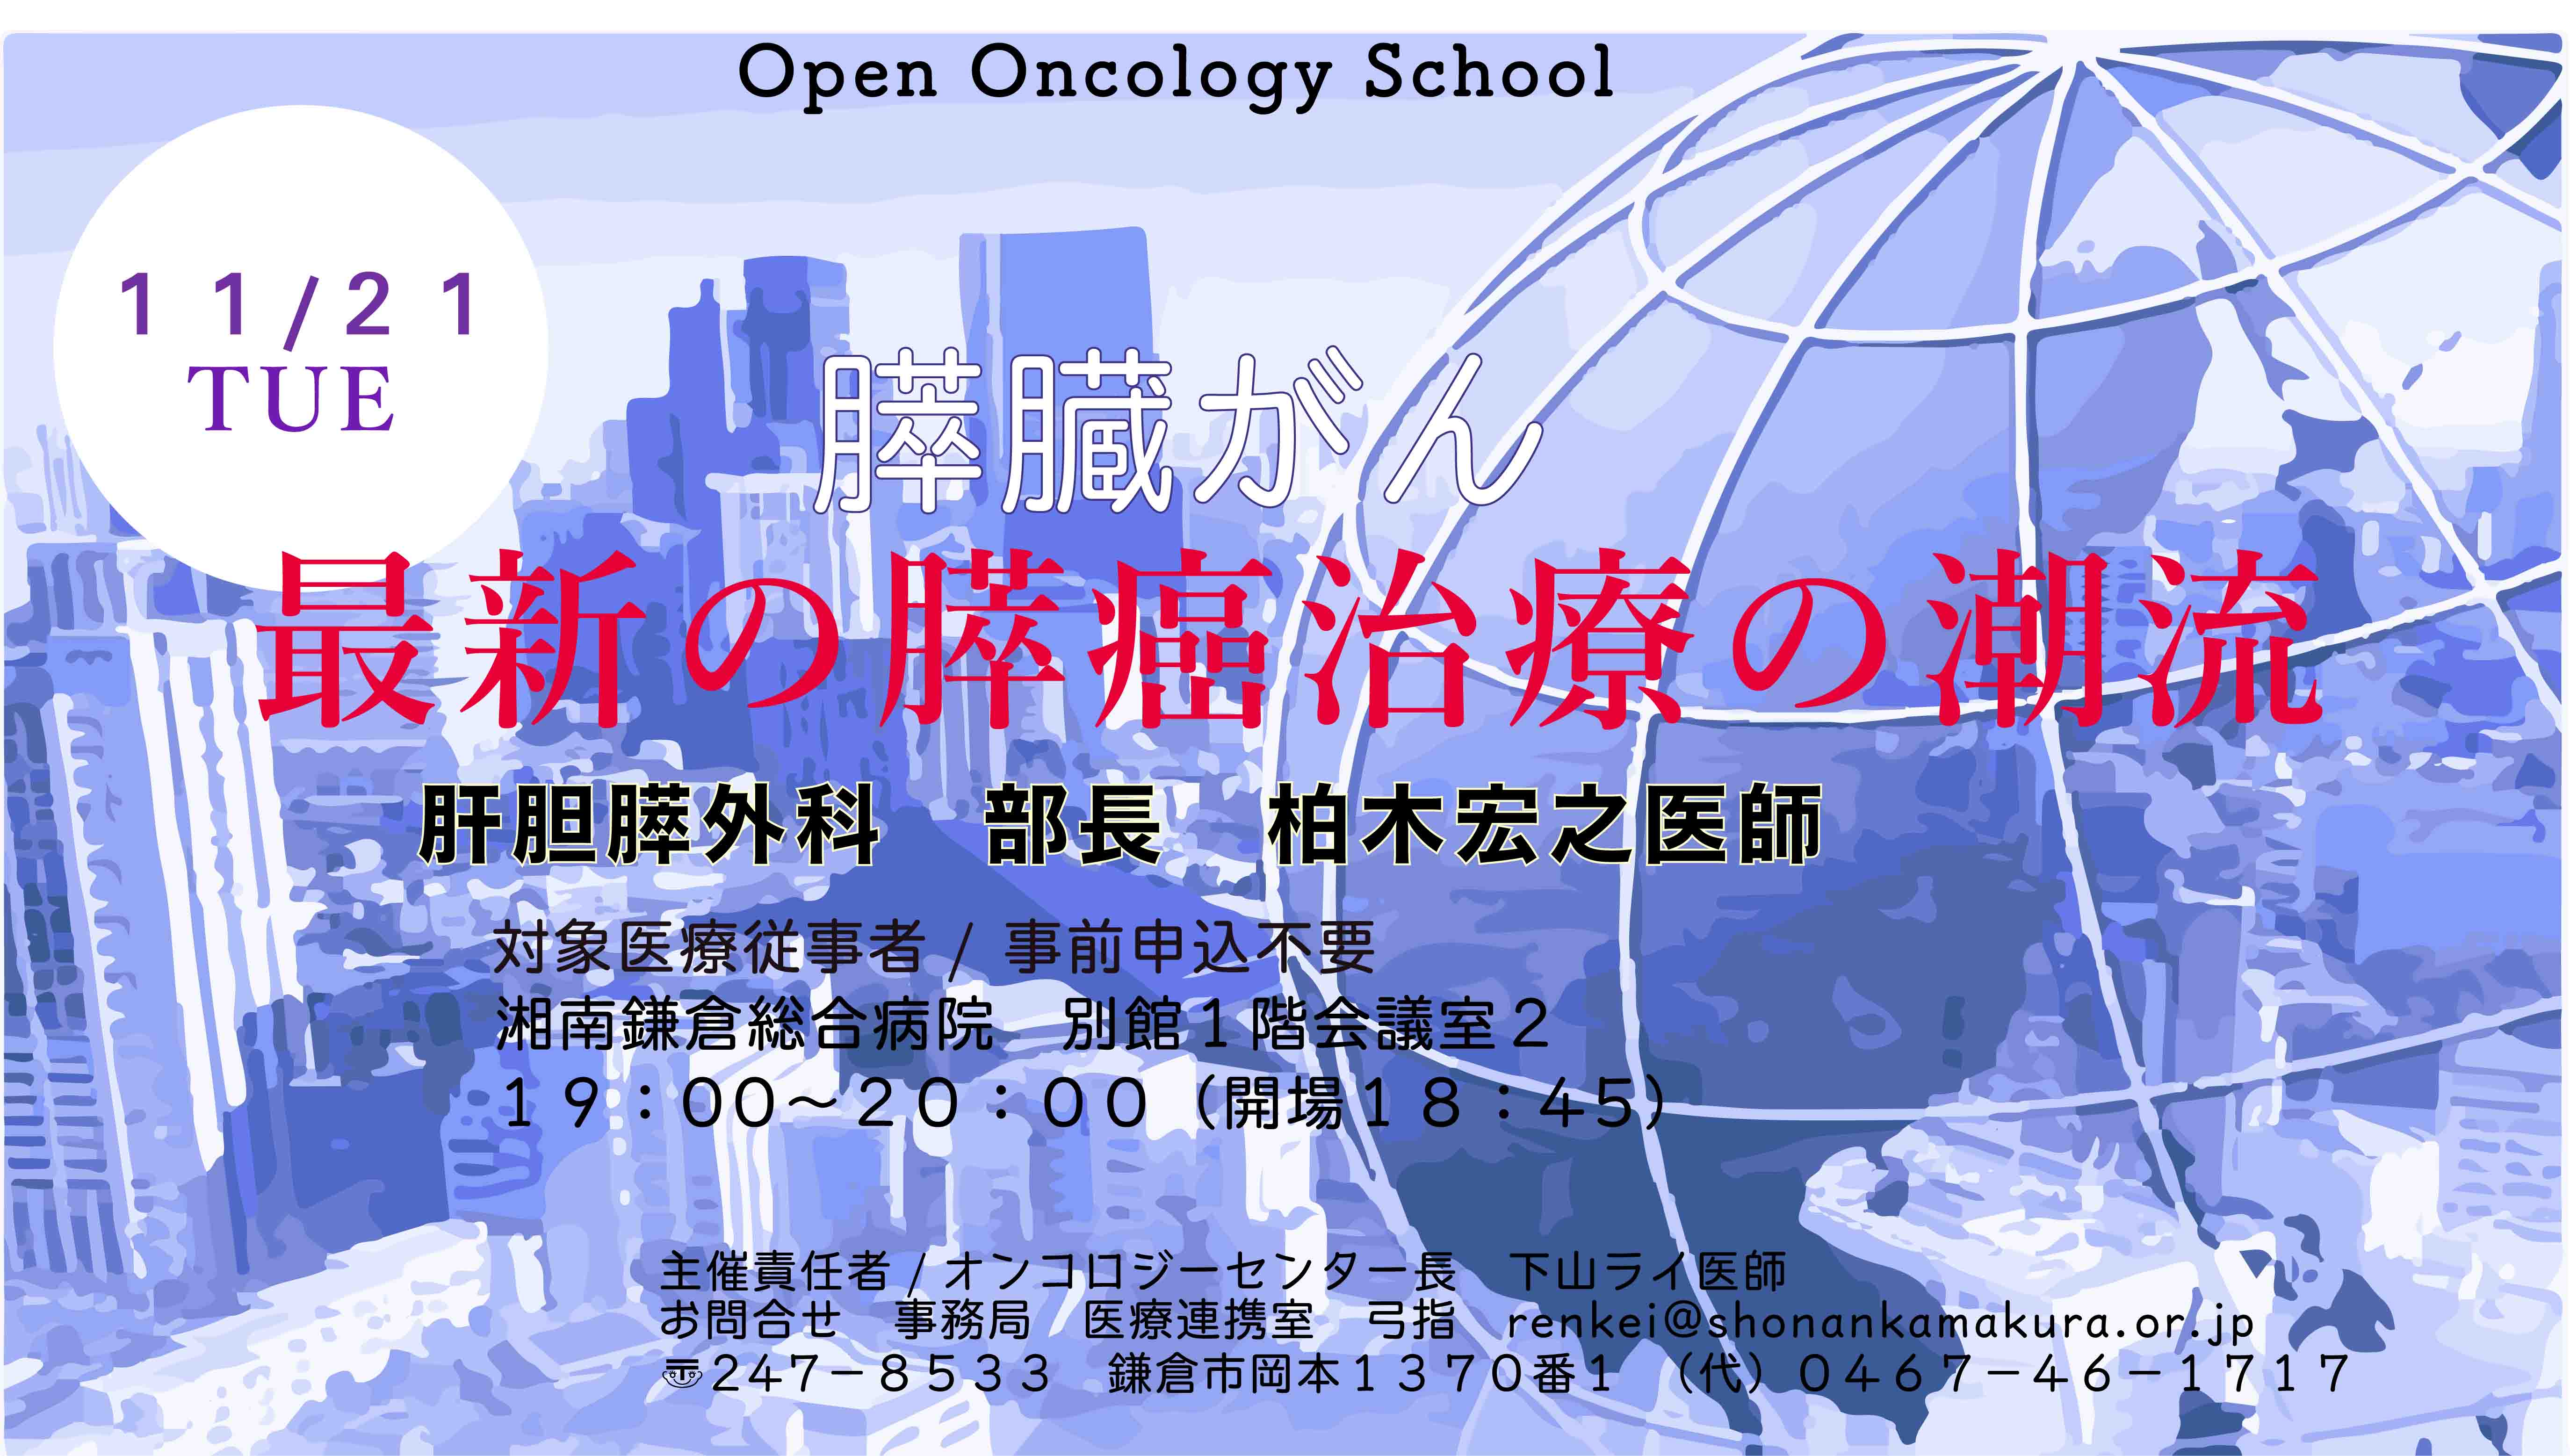 Open-Oncology-School-20171121-膵臓がん.jpg